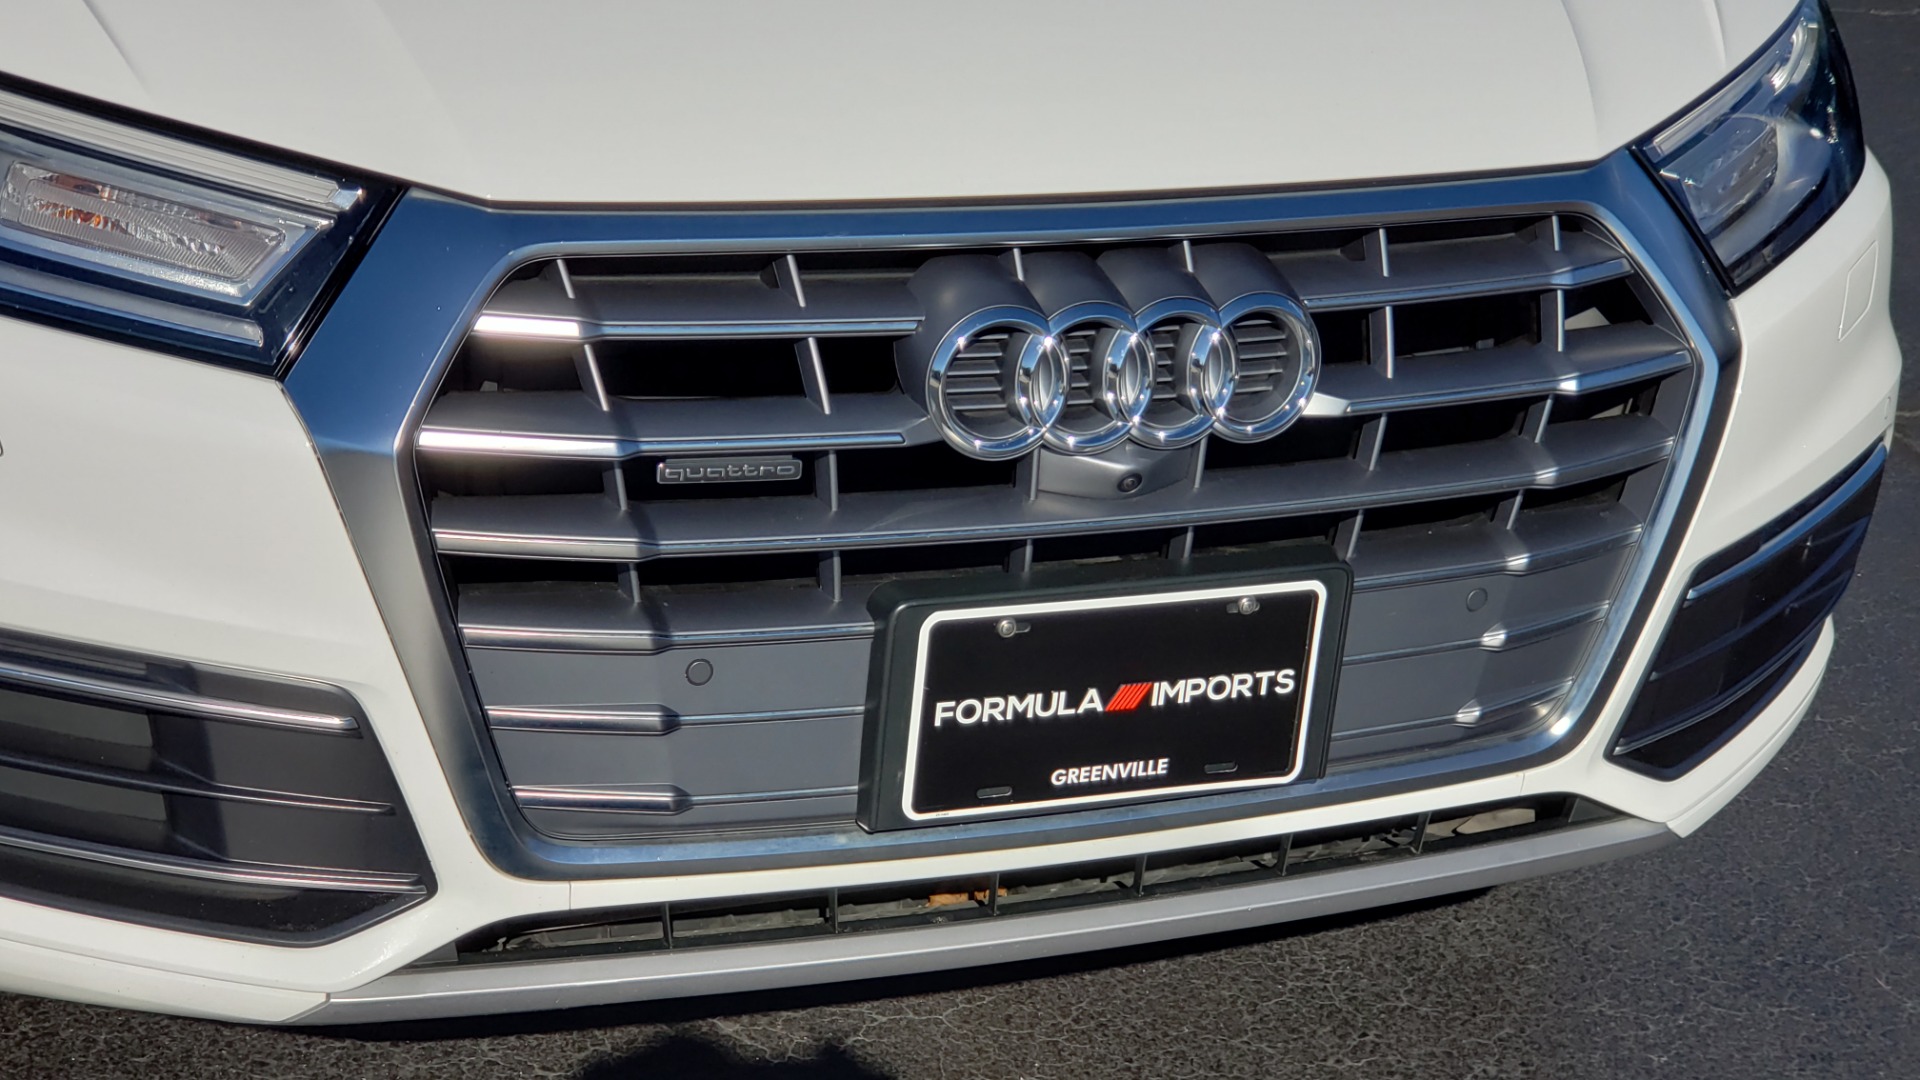 Used 2019 Audi Q5 PREMIUM PLUS 2.0L / AWD / NAV / PANO-ROOF / DRVR ASST / REARVIEW for sale $32,000 at Formula Imports in Charlotte NC 28227 23